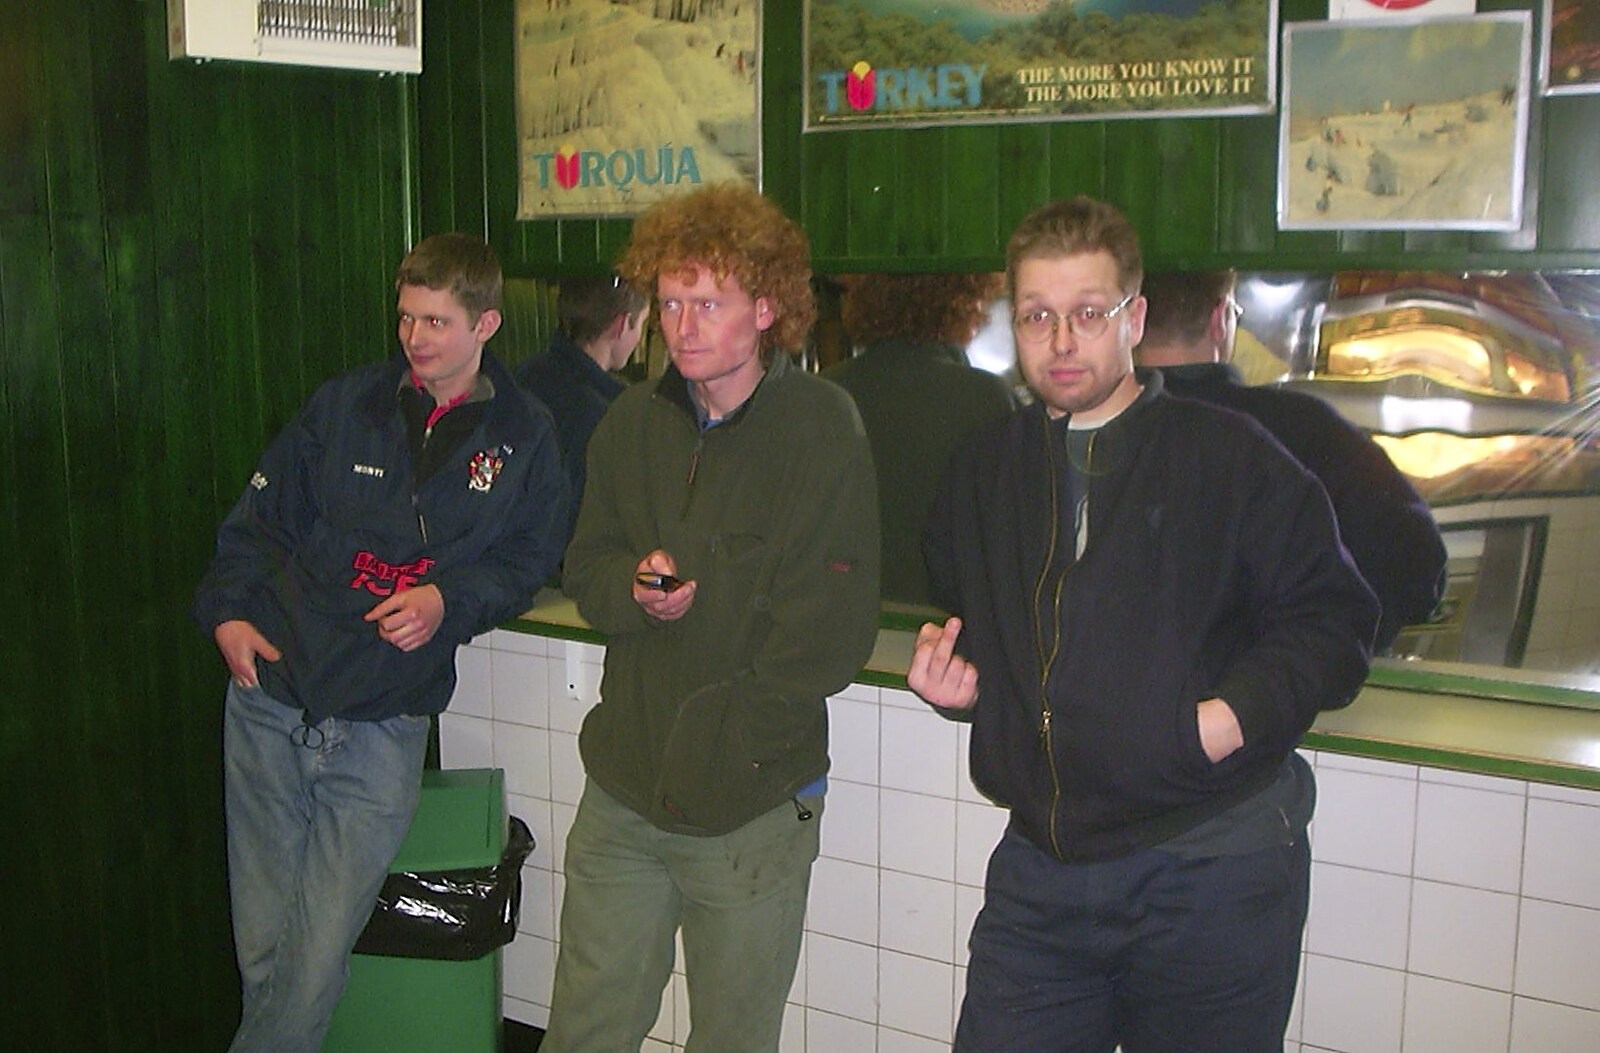 The BSCC's Evil Valentine's Day Bike Ride, Harleston, Norfolk - 14th February 2004: The boys in the kebab shop